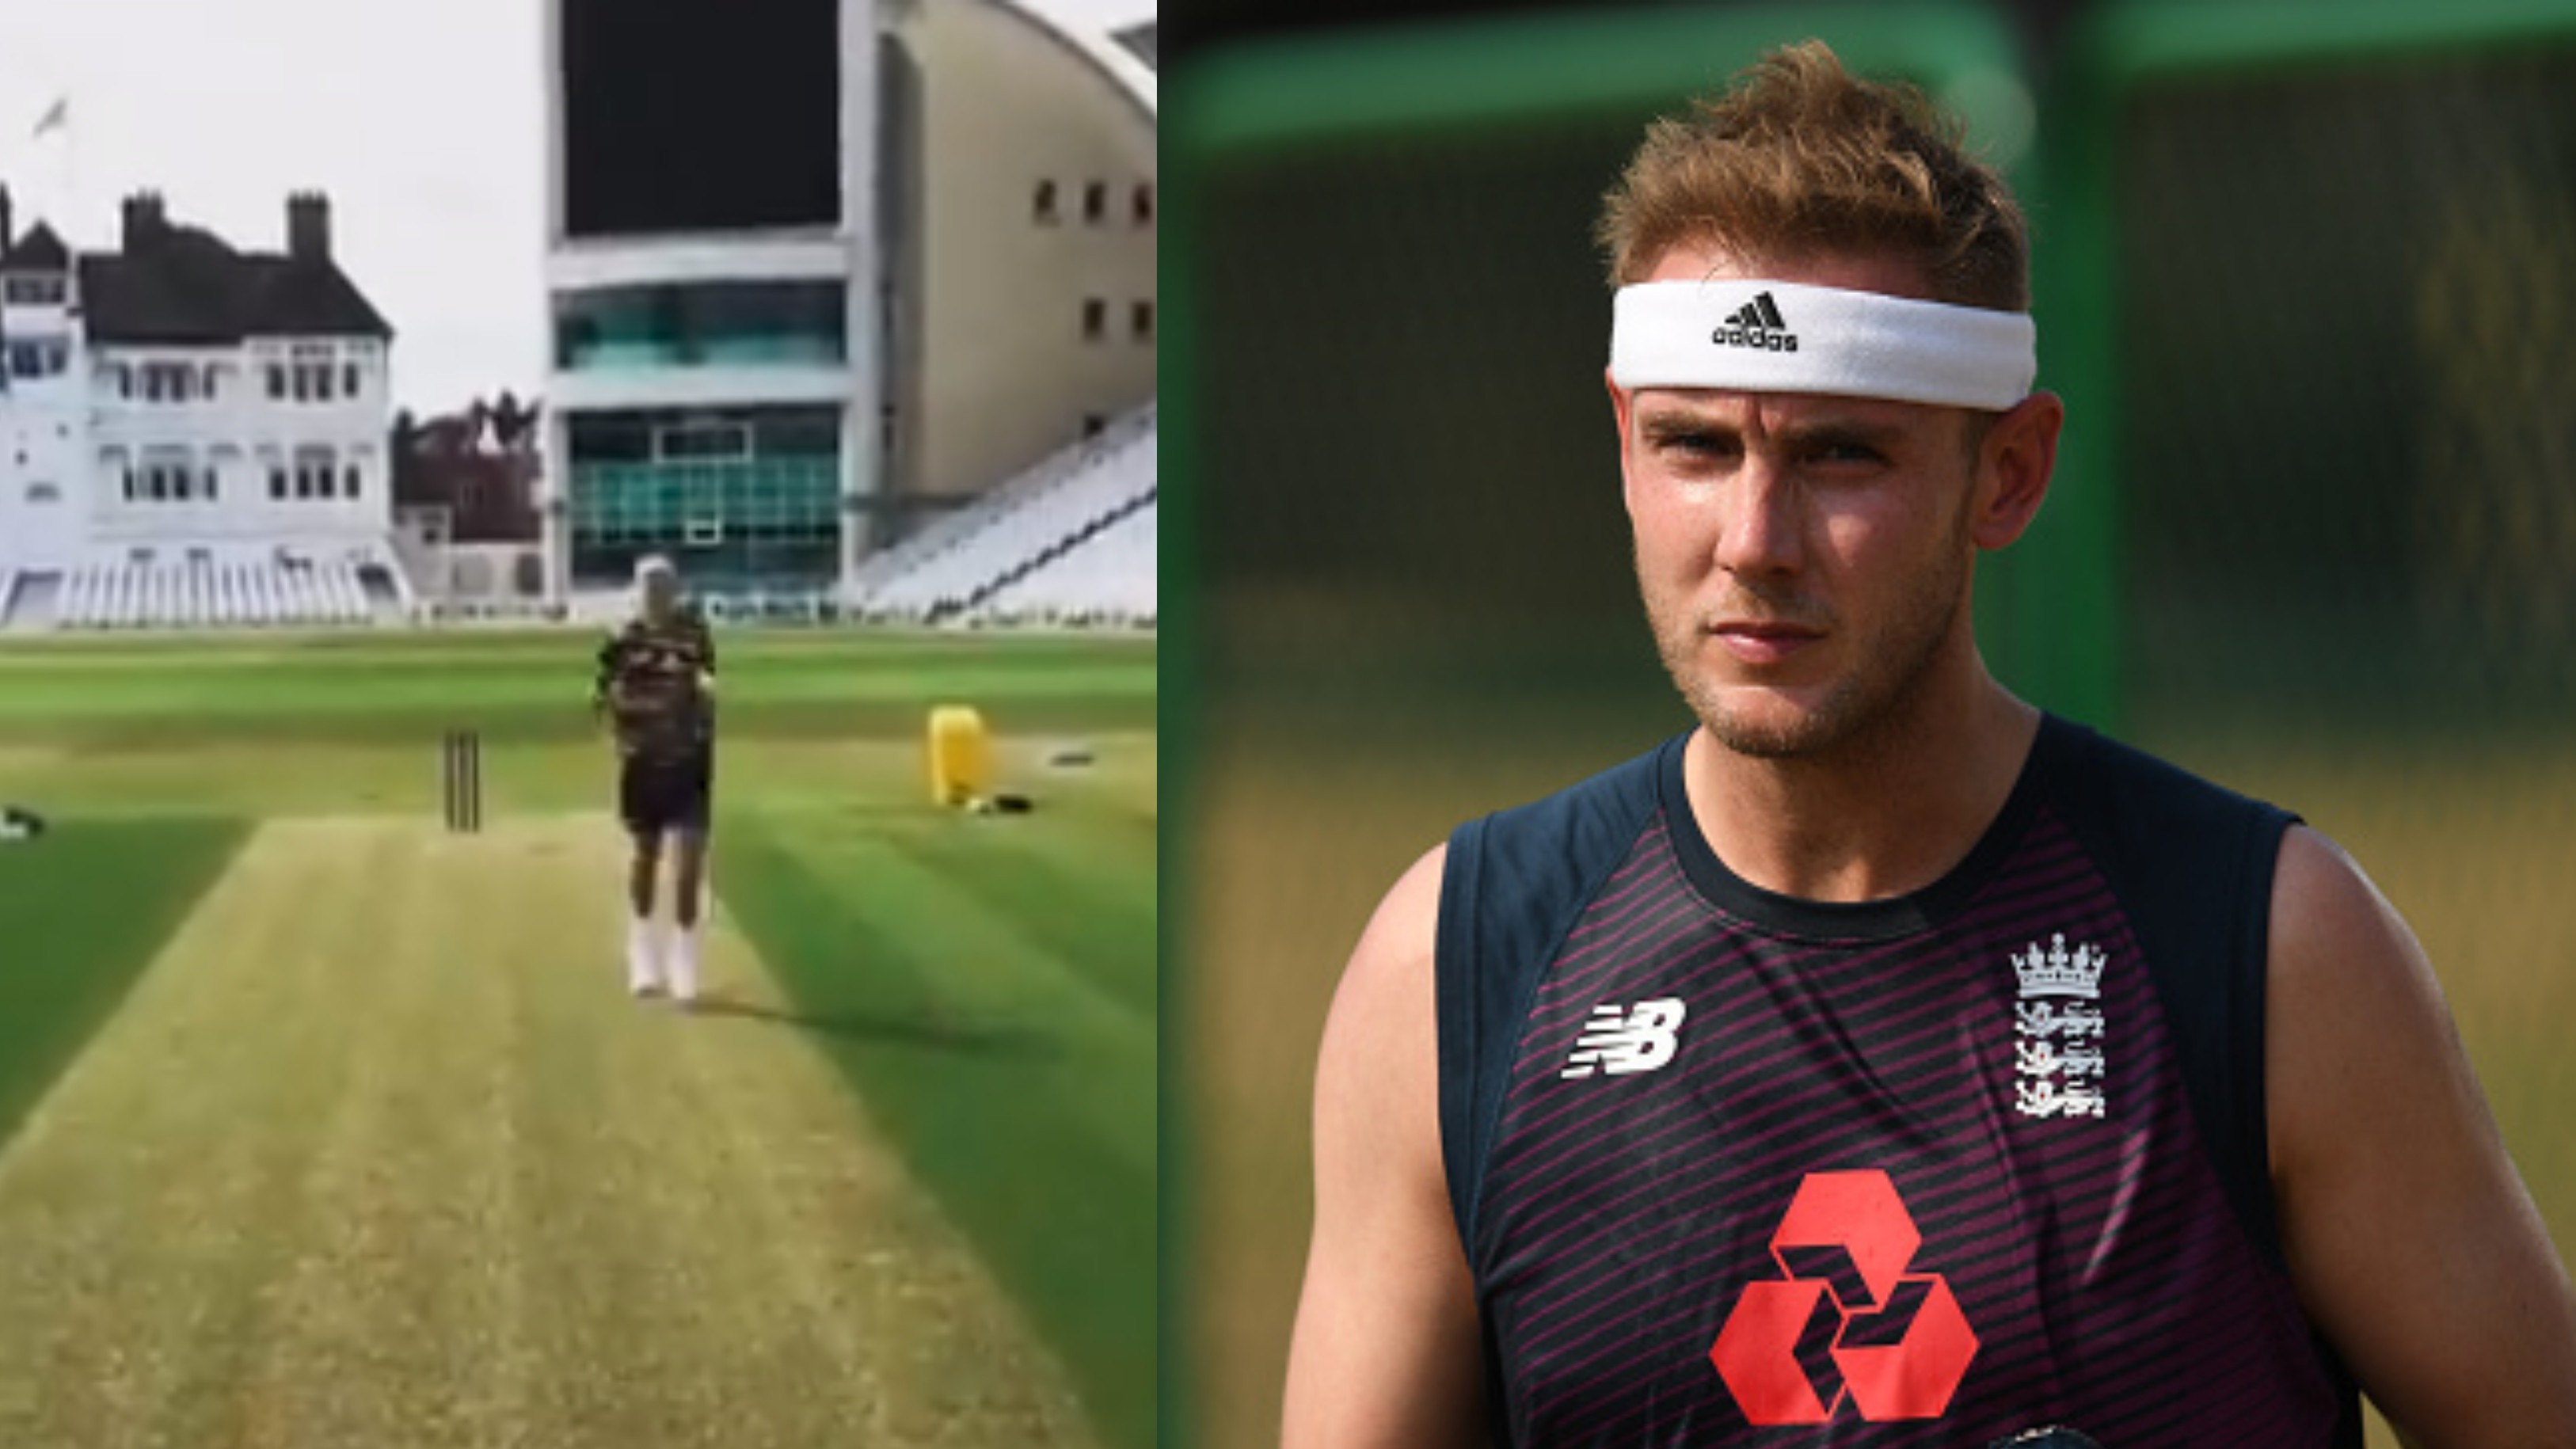 WATCH - Added headband to avoid touching my face repeatedly, says Stuart Broad